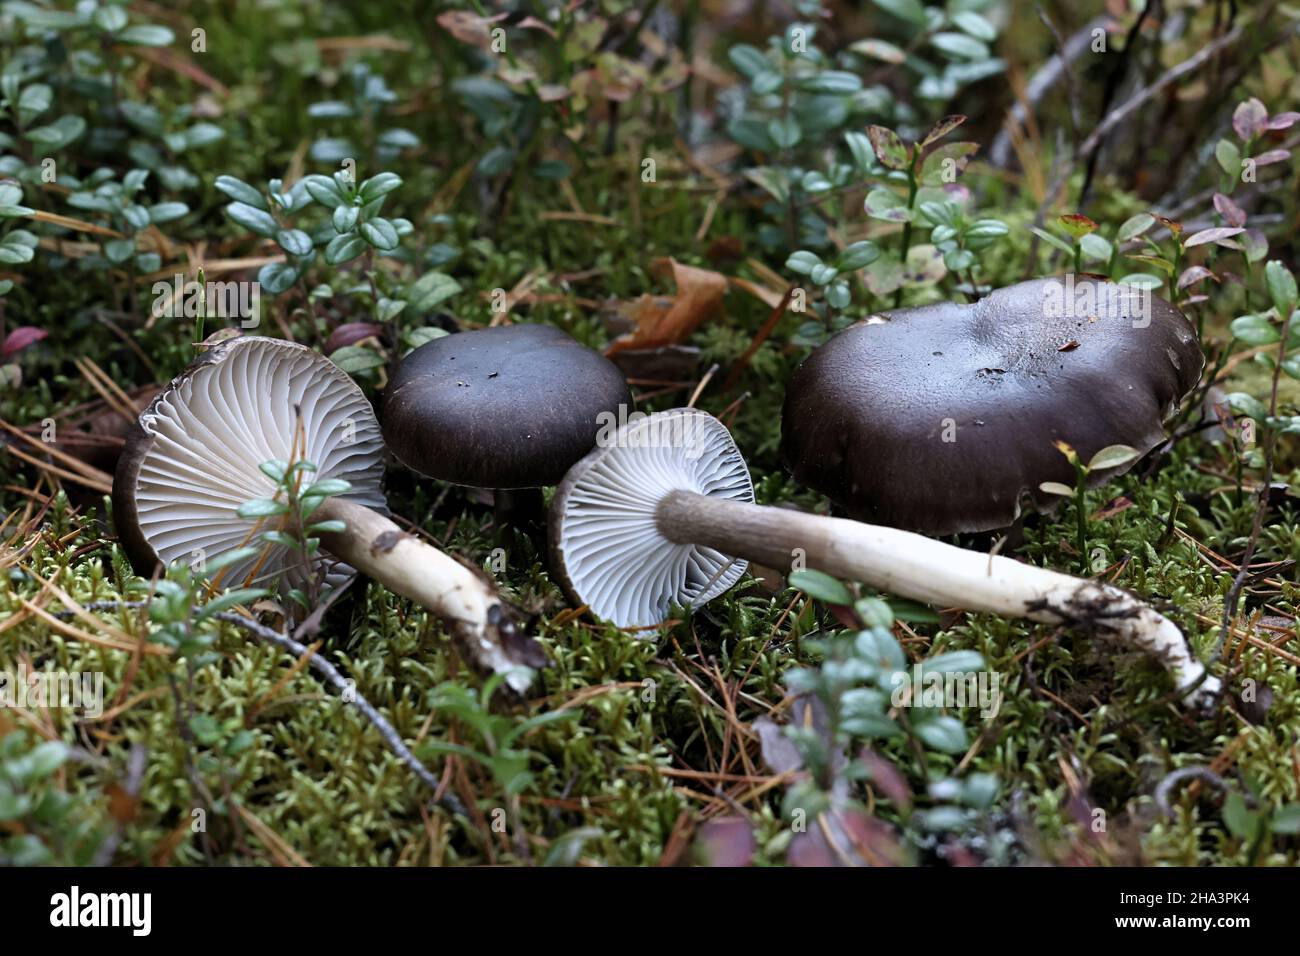 Hygrophorus camarophyllus, known as Arched Woodwax, wild mushroom from Finland Stock Photo